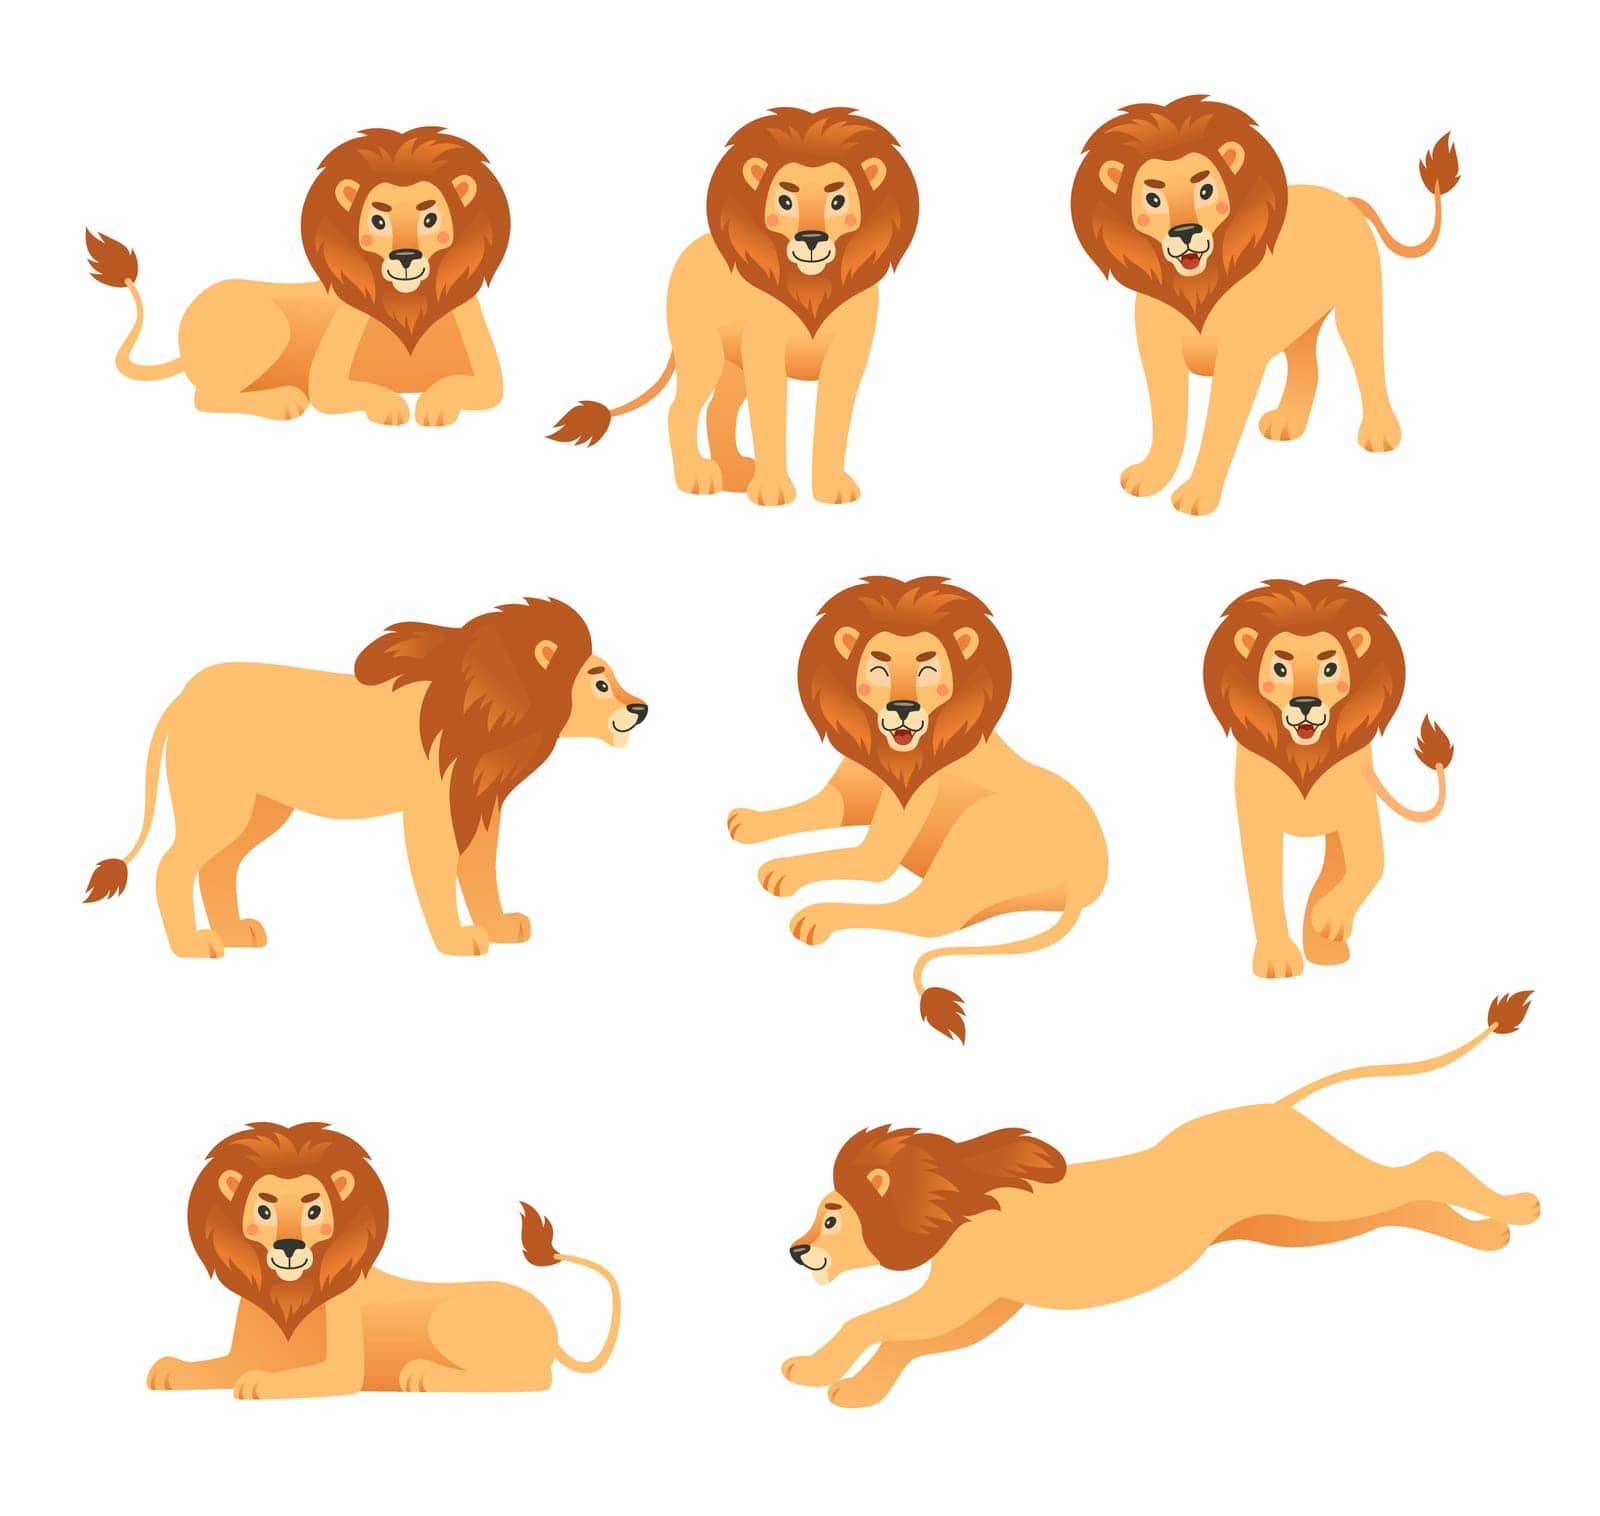 Cute cartoon lion in different poses vector illustration set by pchvector